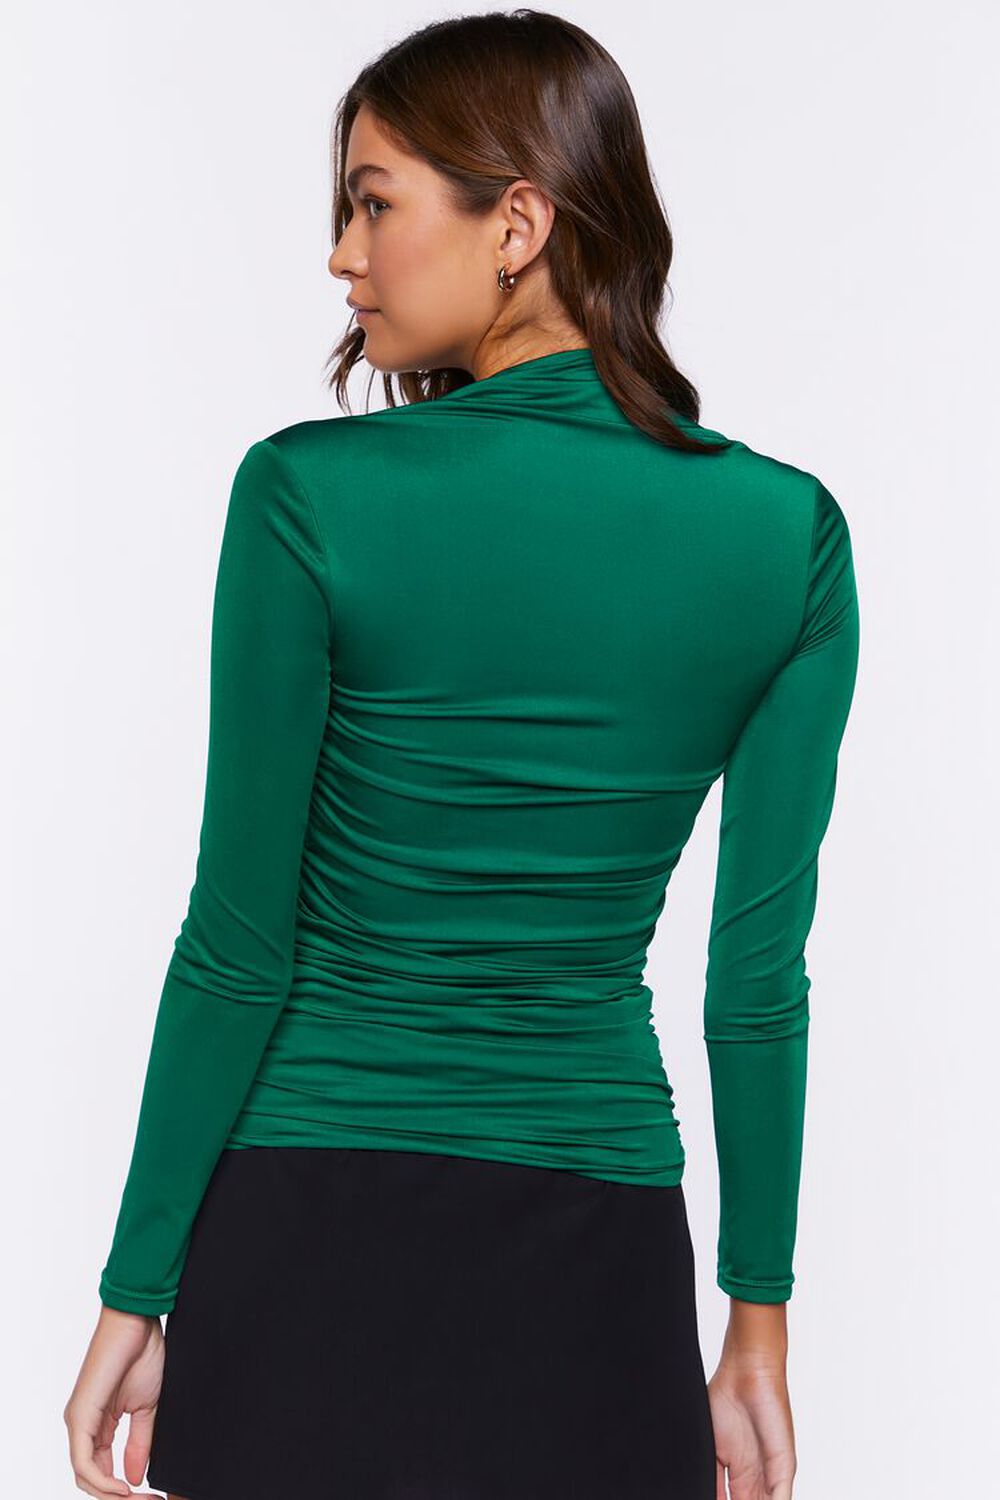 EMERALD Ruched Long-Sleeve Top, image 3